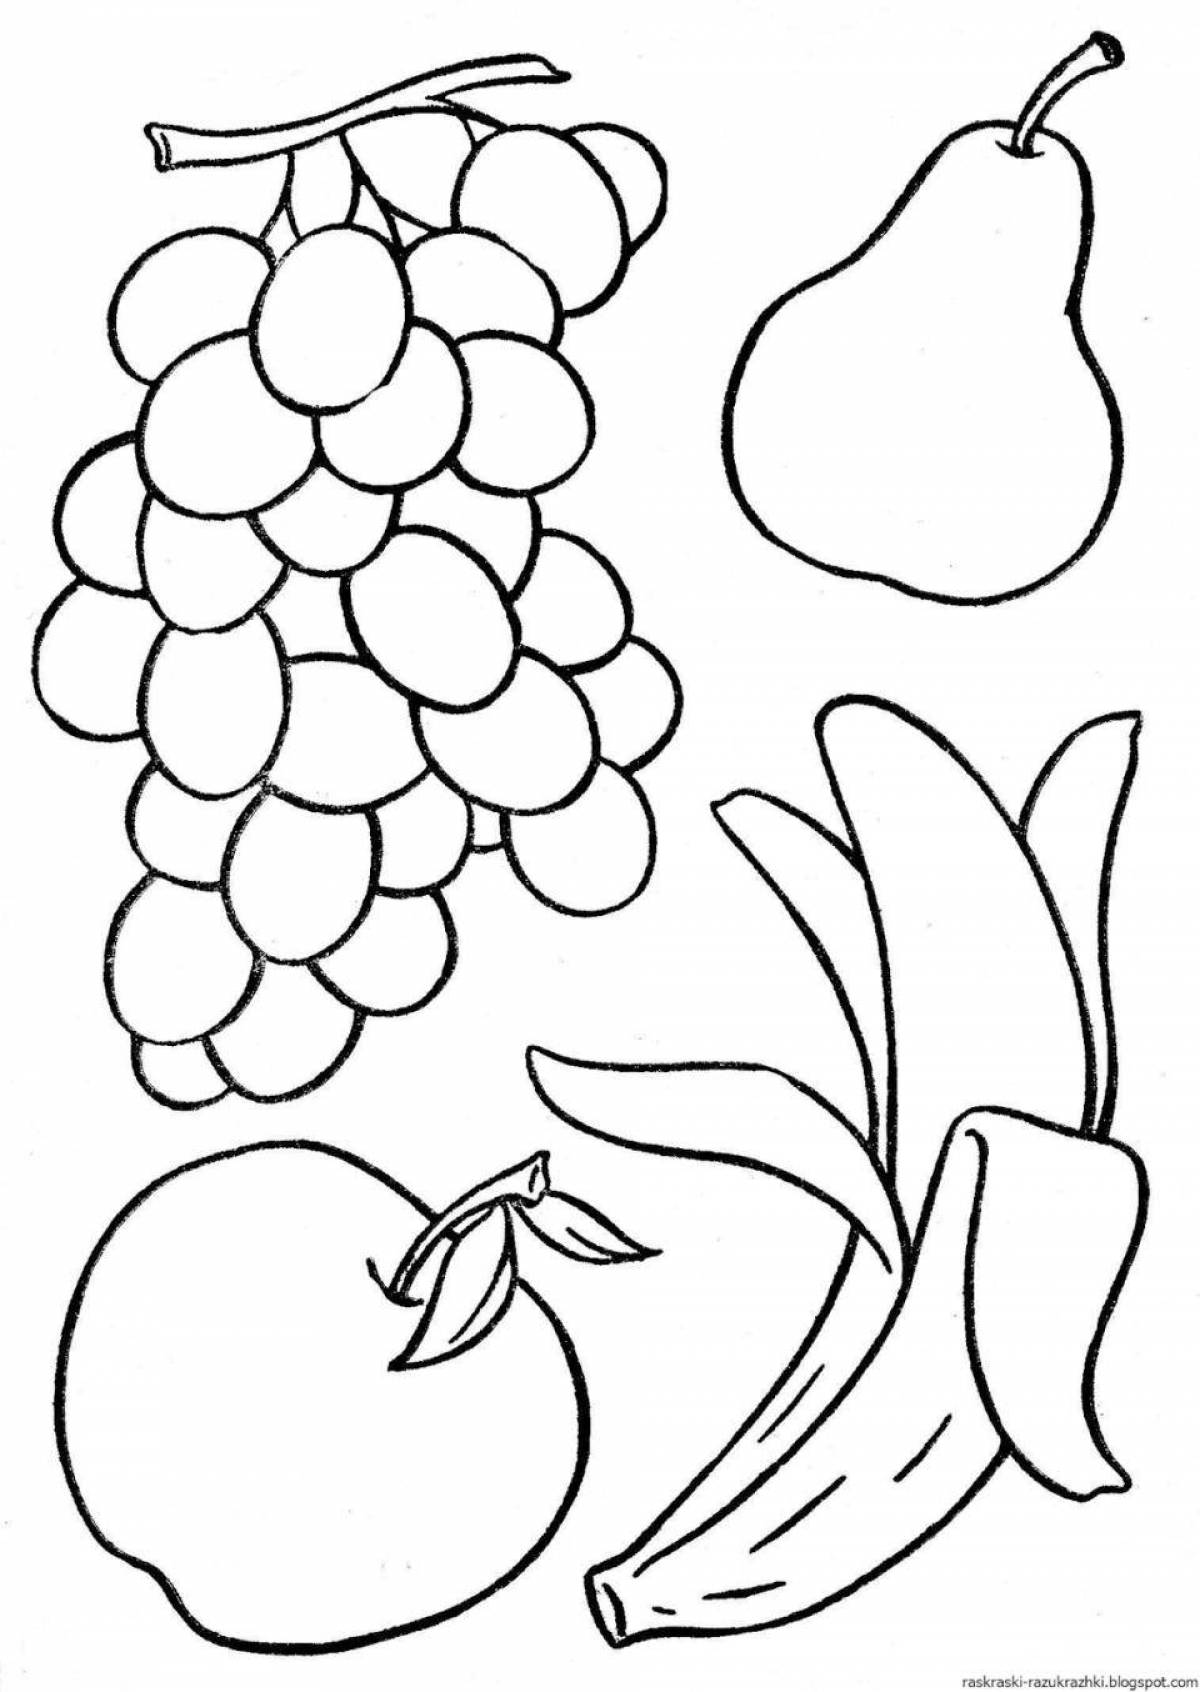 Stimulating fruit coloring pages for 4-5 year olds